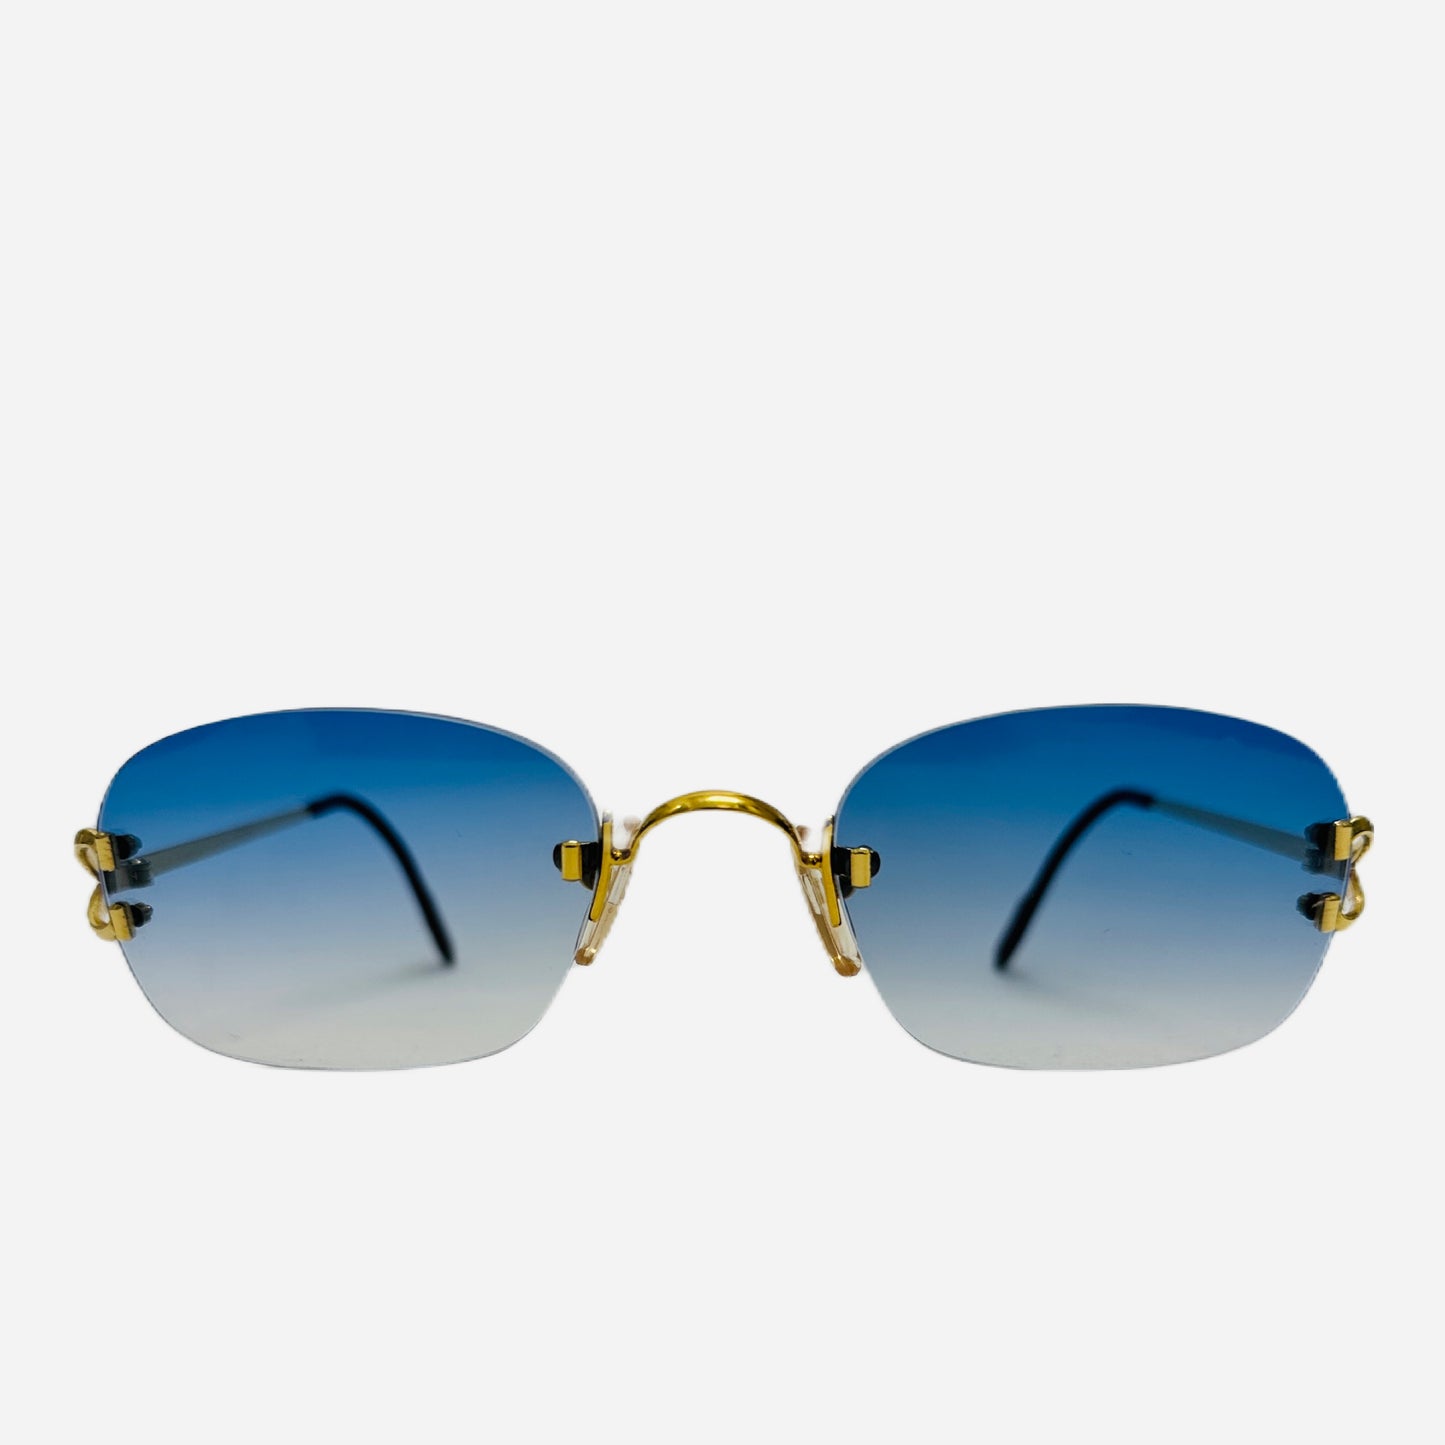 Vintage-Cartier-Big-C-Serrano-Sonnenbrille-Sunglasses-22CT-Carats-Gold-Plated-the-ssekers